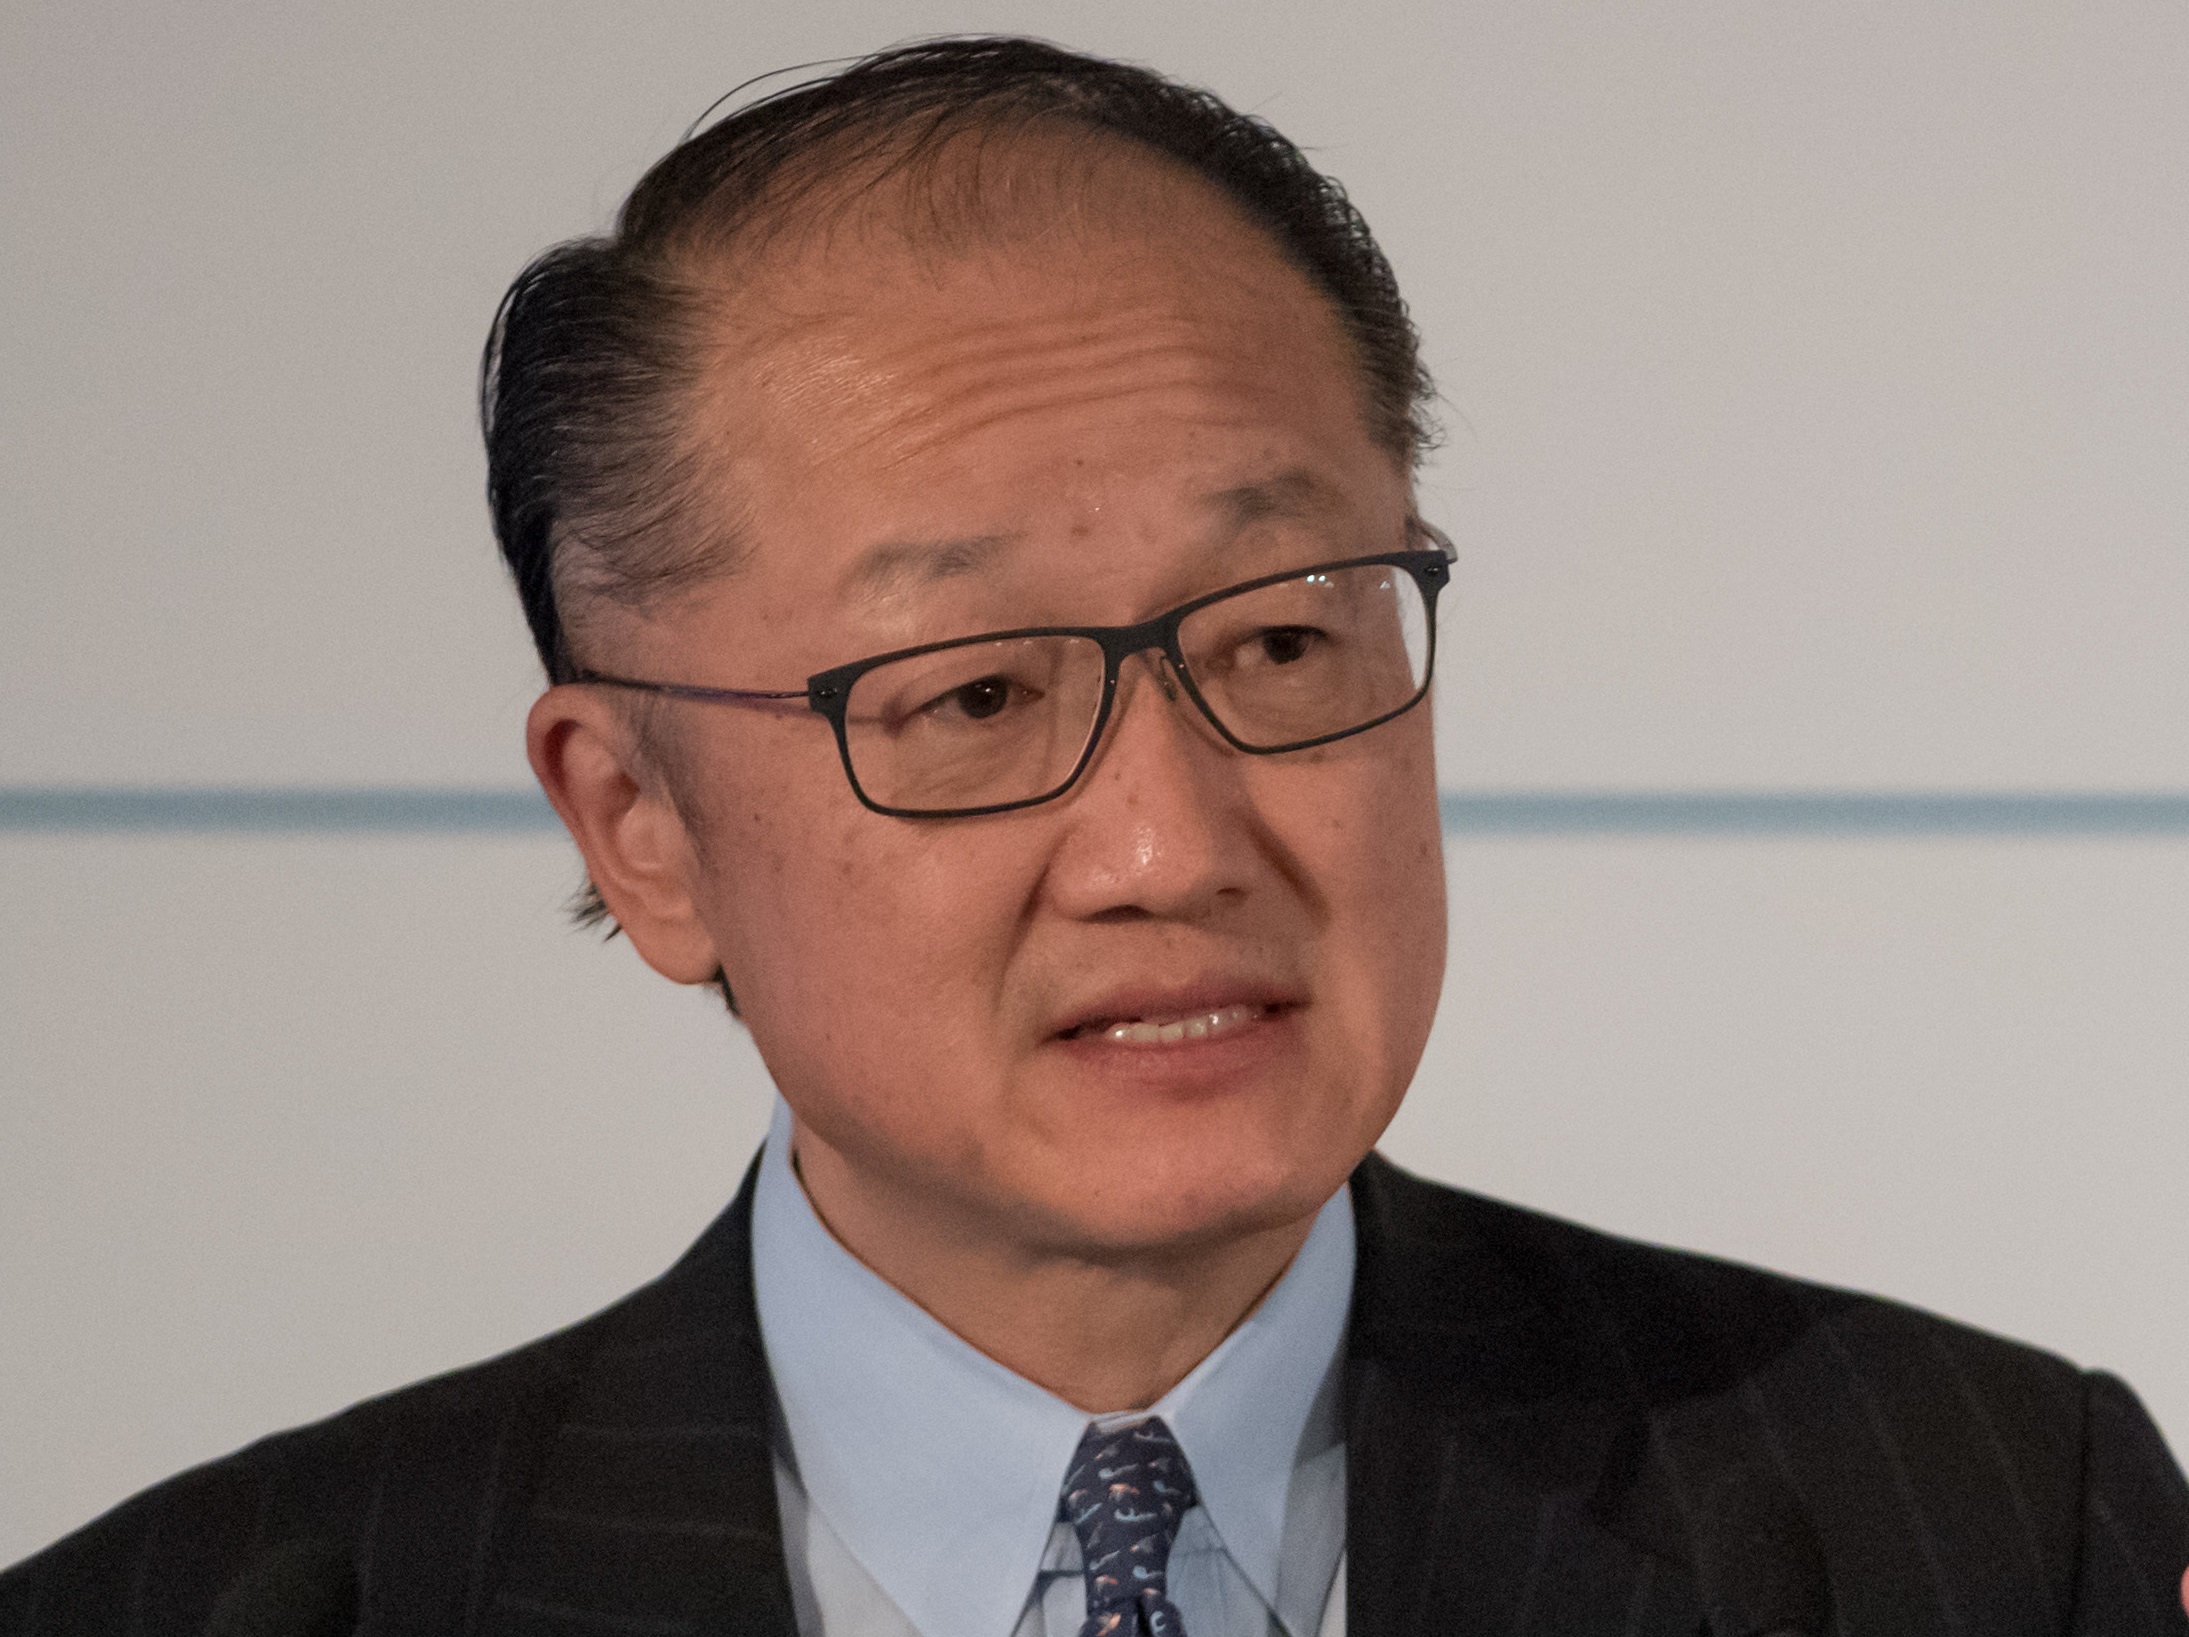 President of World Bank steps down, CEO to assume role of interim President